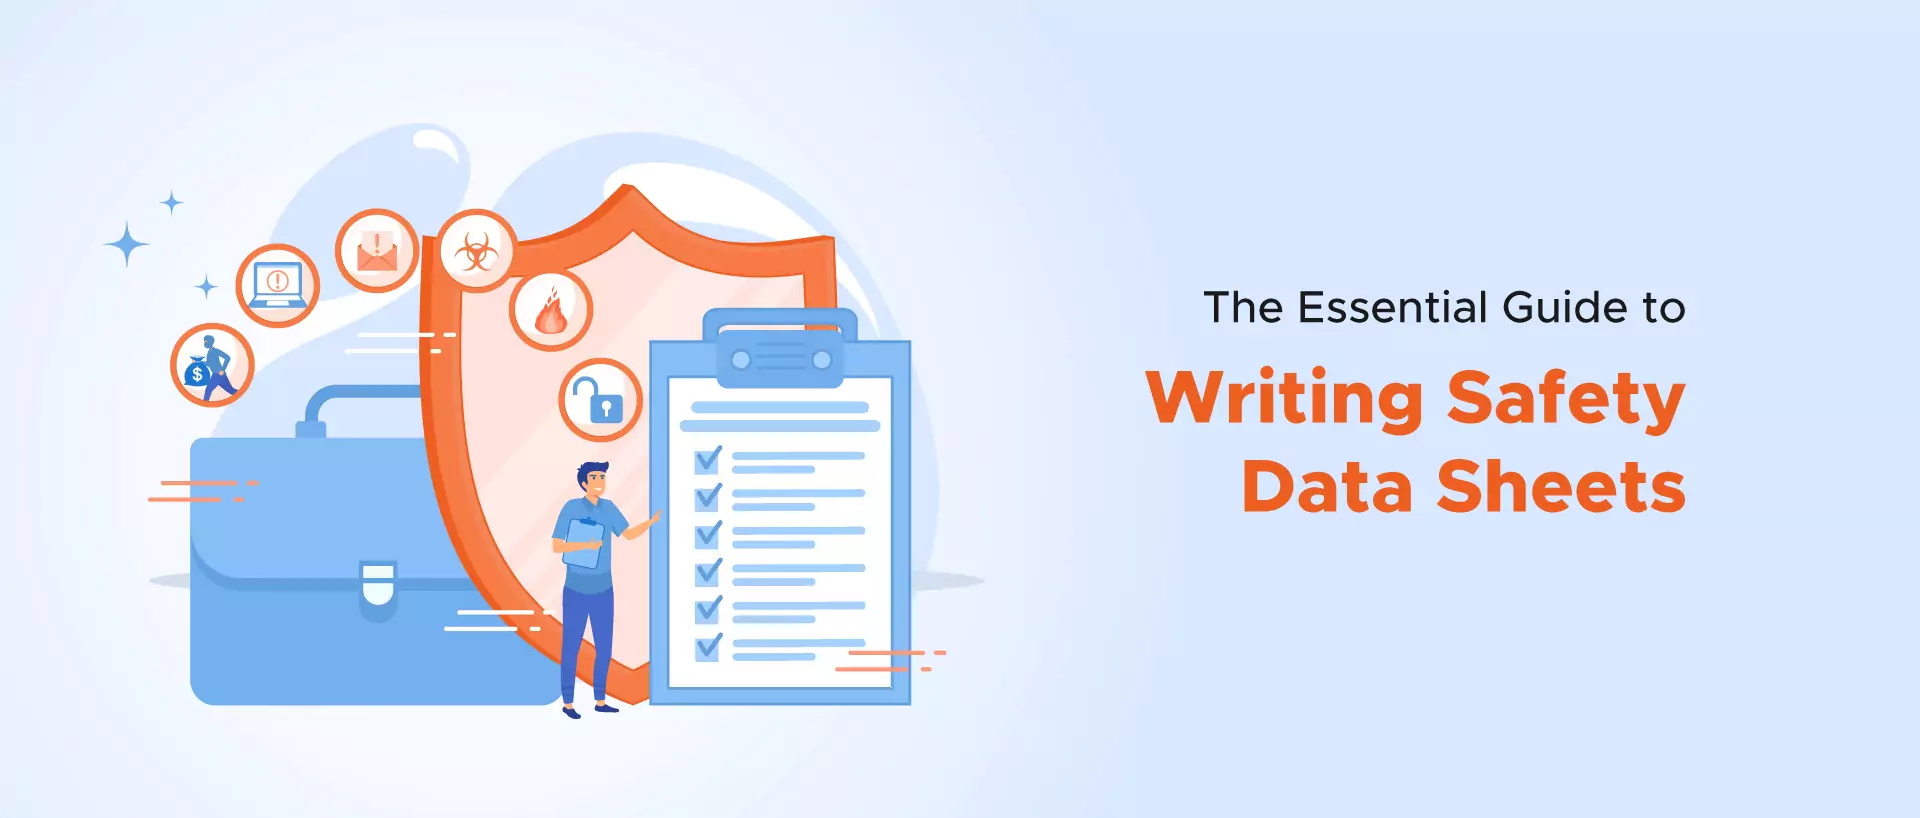 The Essential Guide to Writing Safety Data Sheets